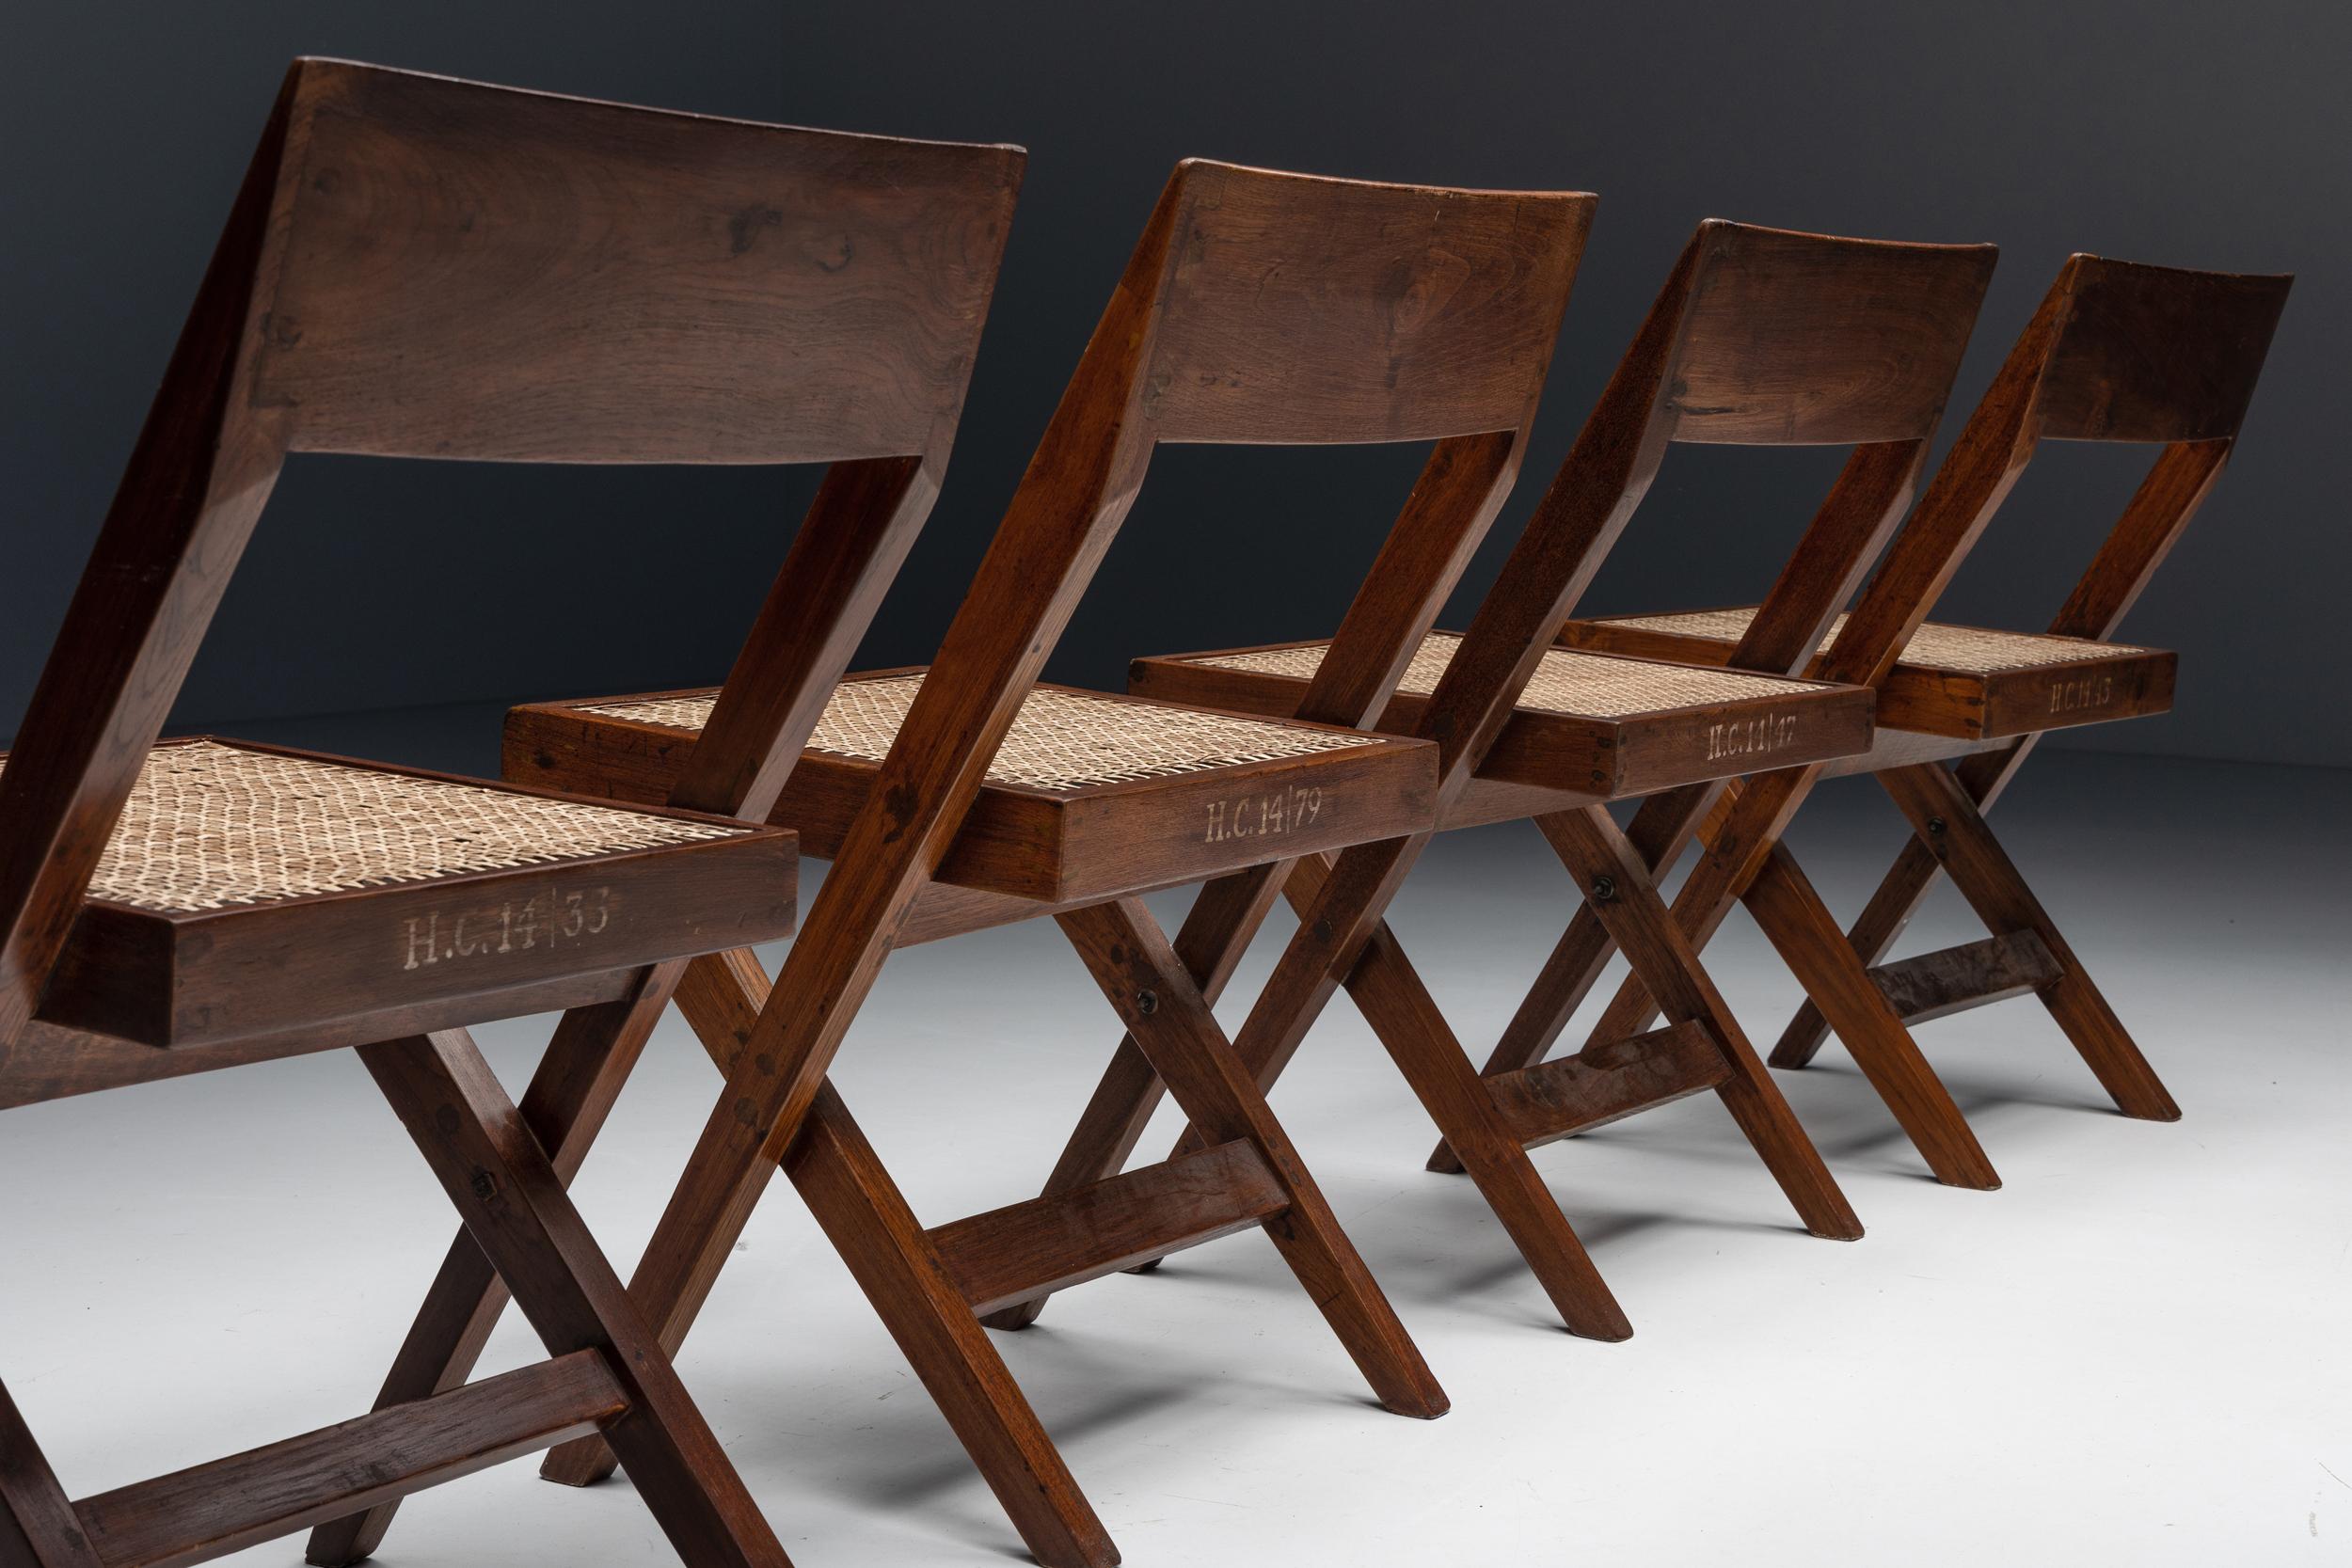 Pierre Jeanneret, library chair, set of four, India, 1952-1965

H.C 14 / 33, 43, 47, 79
Meaning chairs nr 33, 43, 47, 79 for Room 14 of the High Court of Chandigarh
It's a rare feat to have the chairs perfectly identifiable.

Another